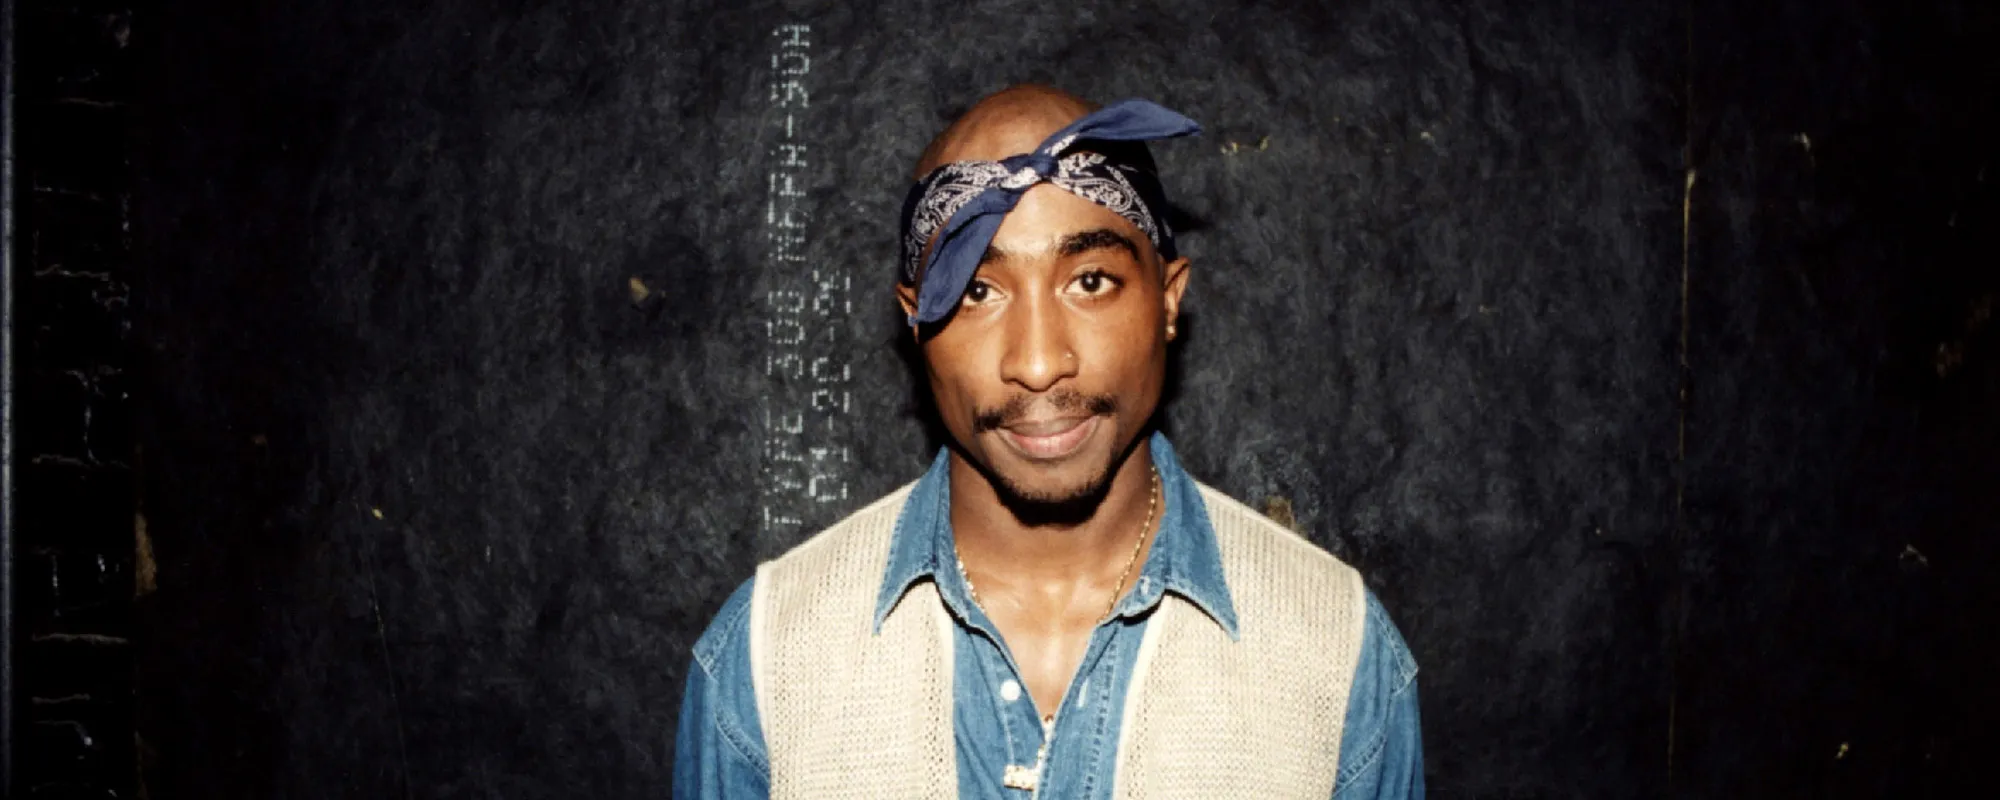 The Mournful Meaning Behind Tupac’s “Life Goes On”